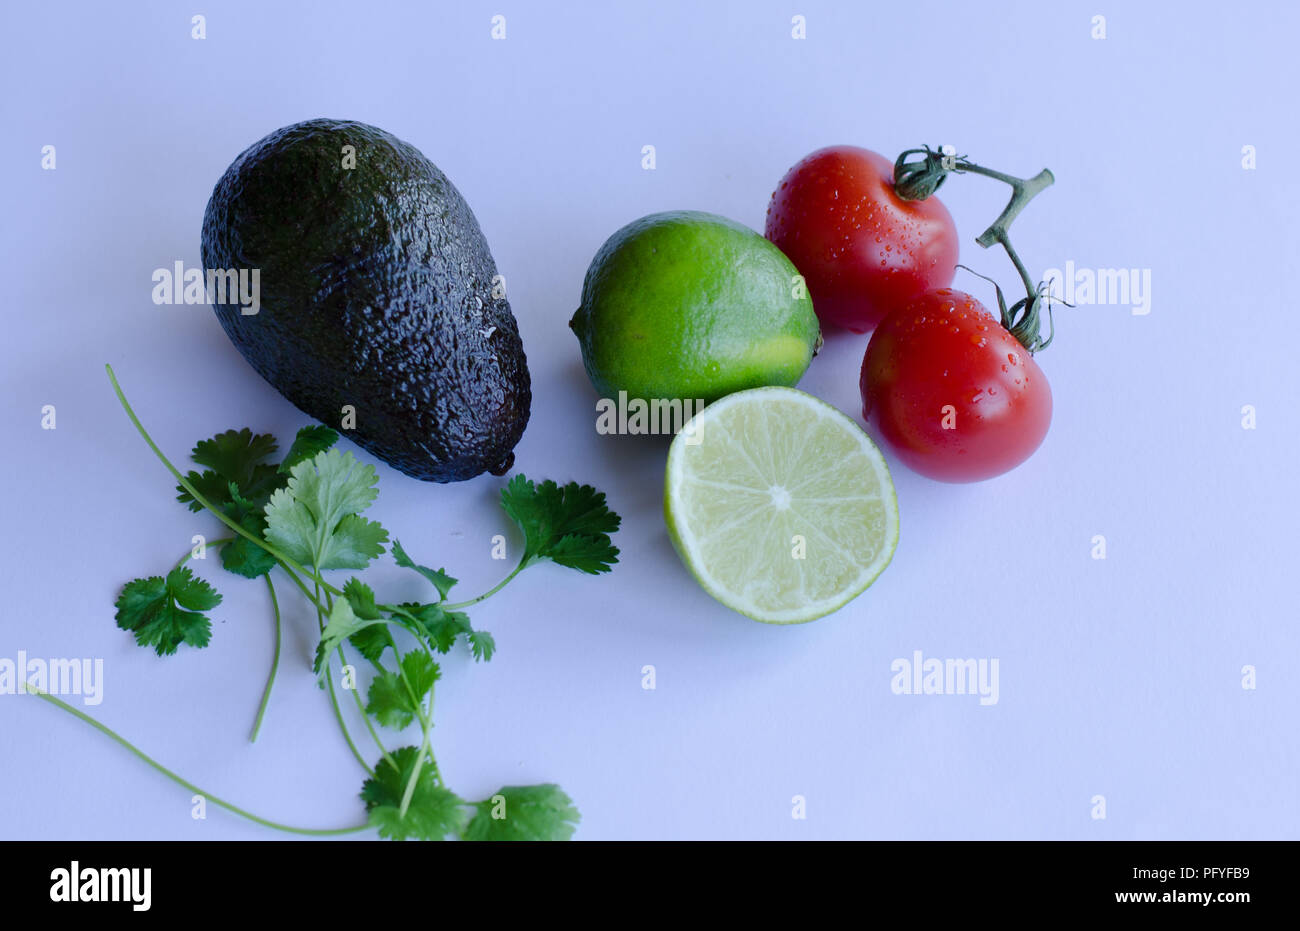 Avocado, lime cut in half, tomatoes on the vine and cilantro/koriander placed in a group on a white background Stock Photo